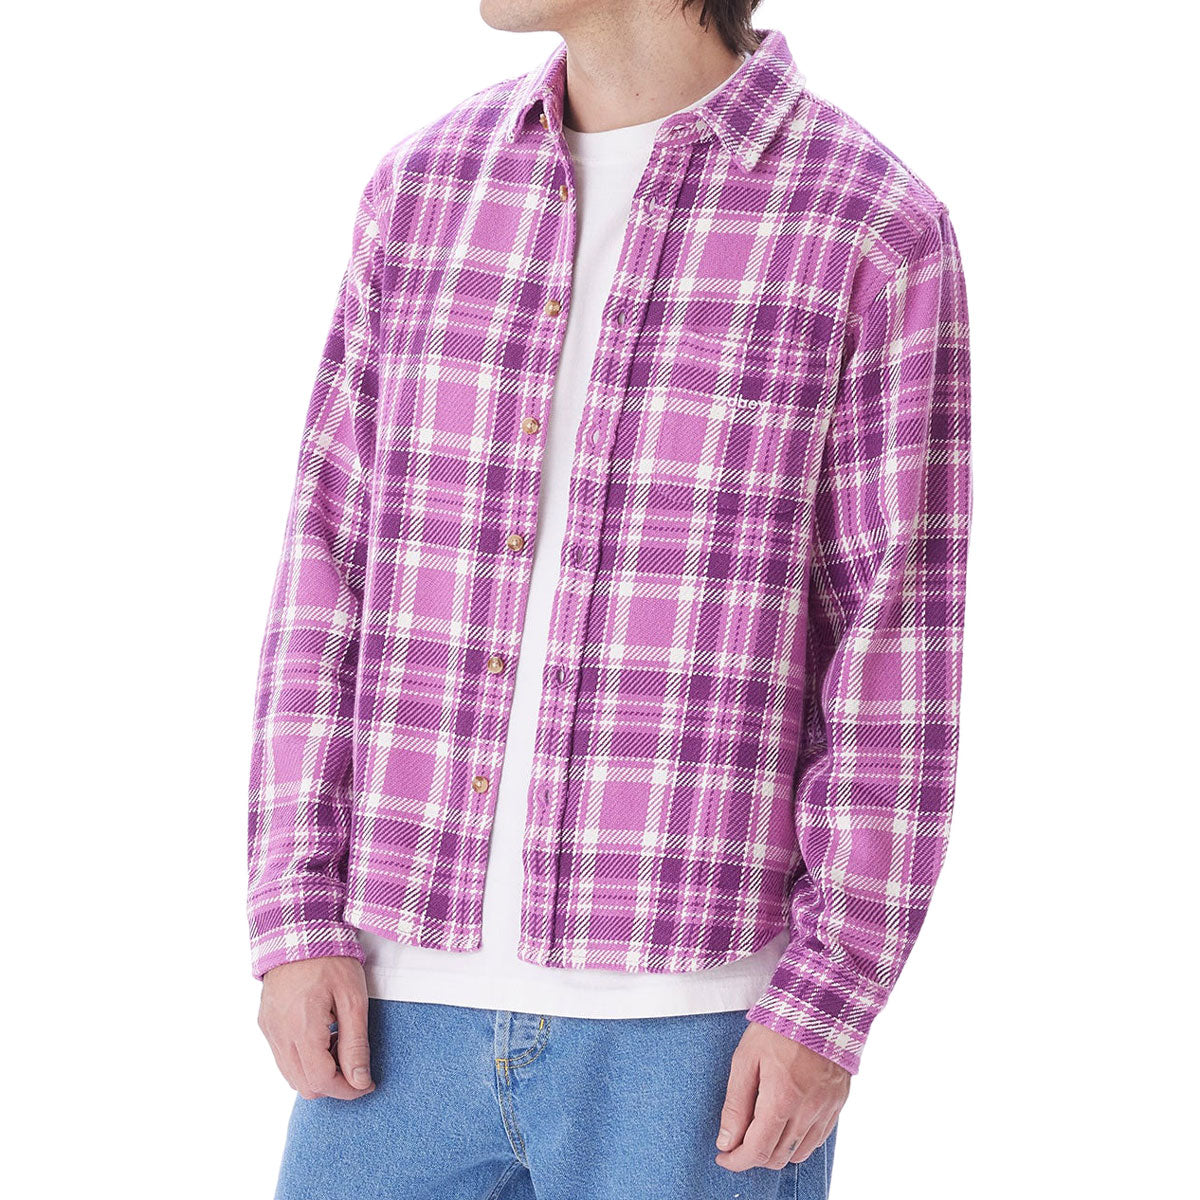 Obey Fred Woven Shirt - Mulberry Purple/Multi image 1